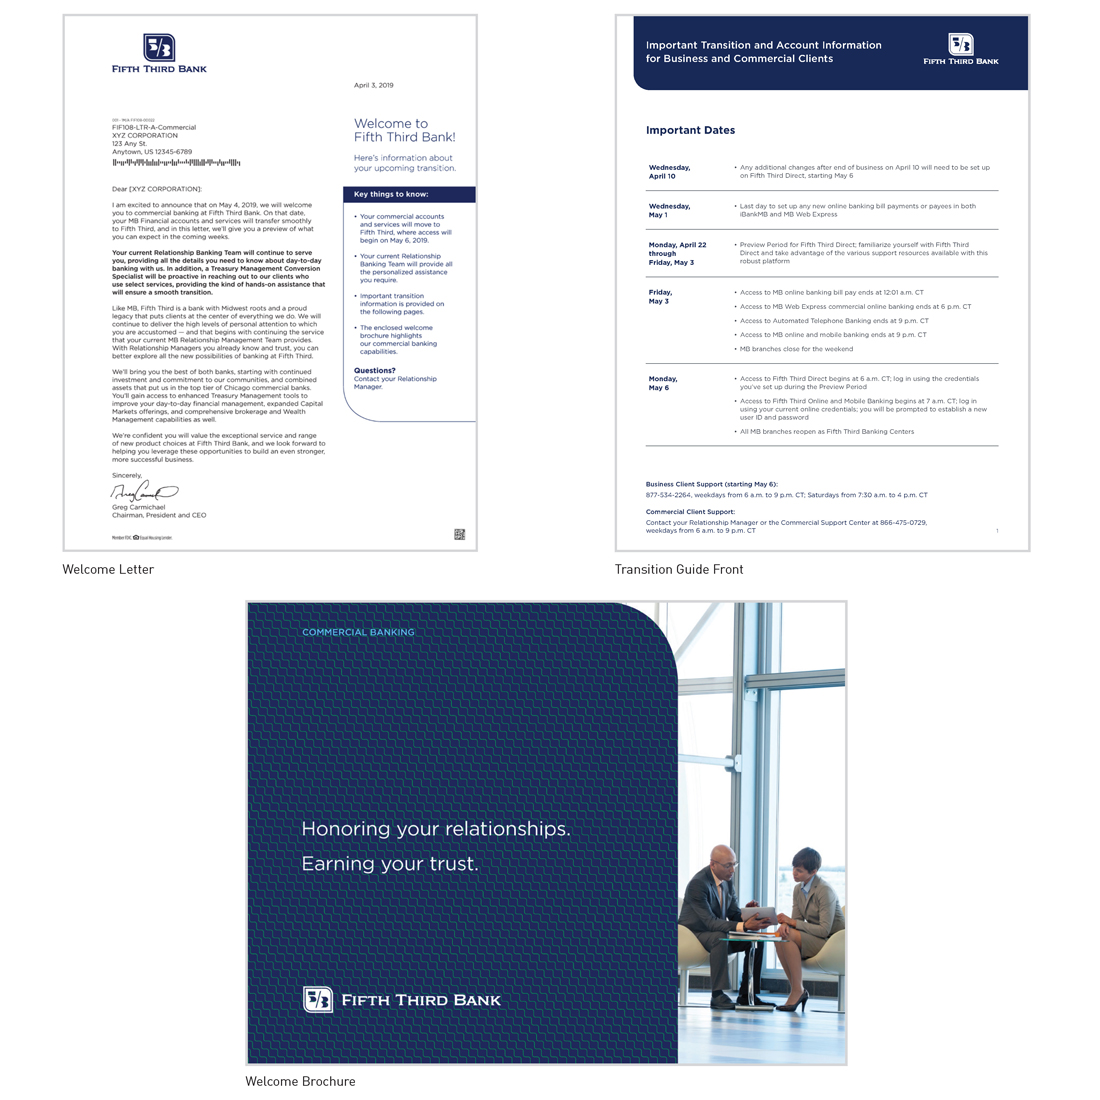 Fifth Third Bank commercial conversion welcome letter, welcome brochure, and transition guide